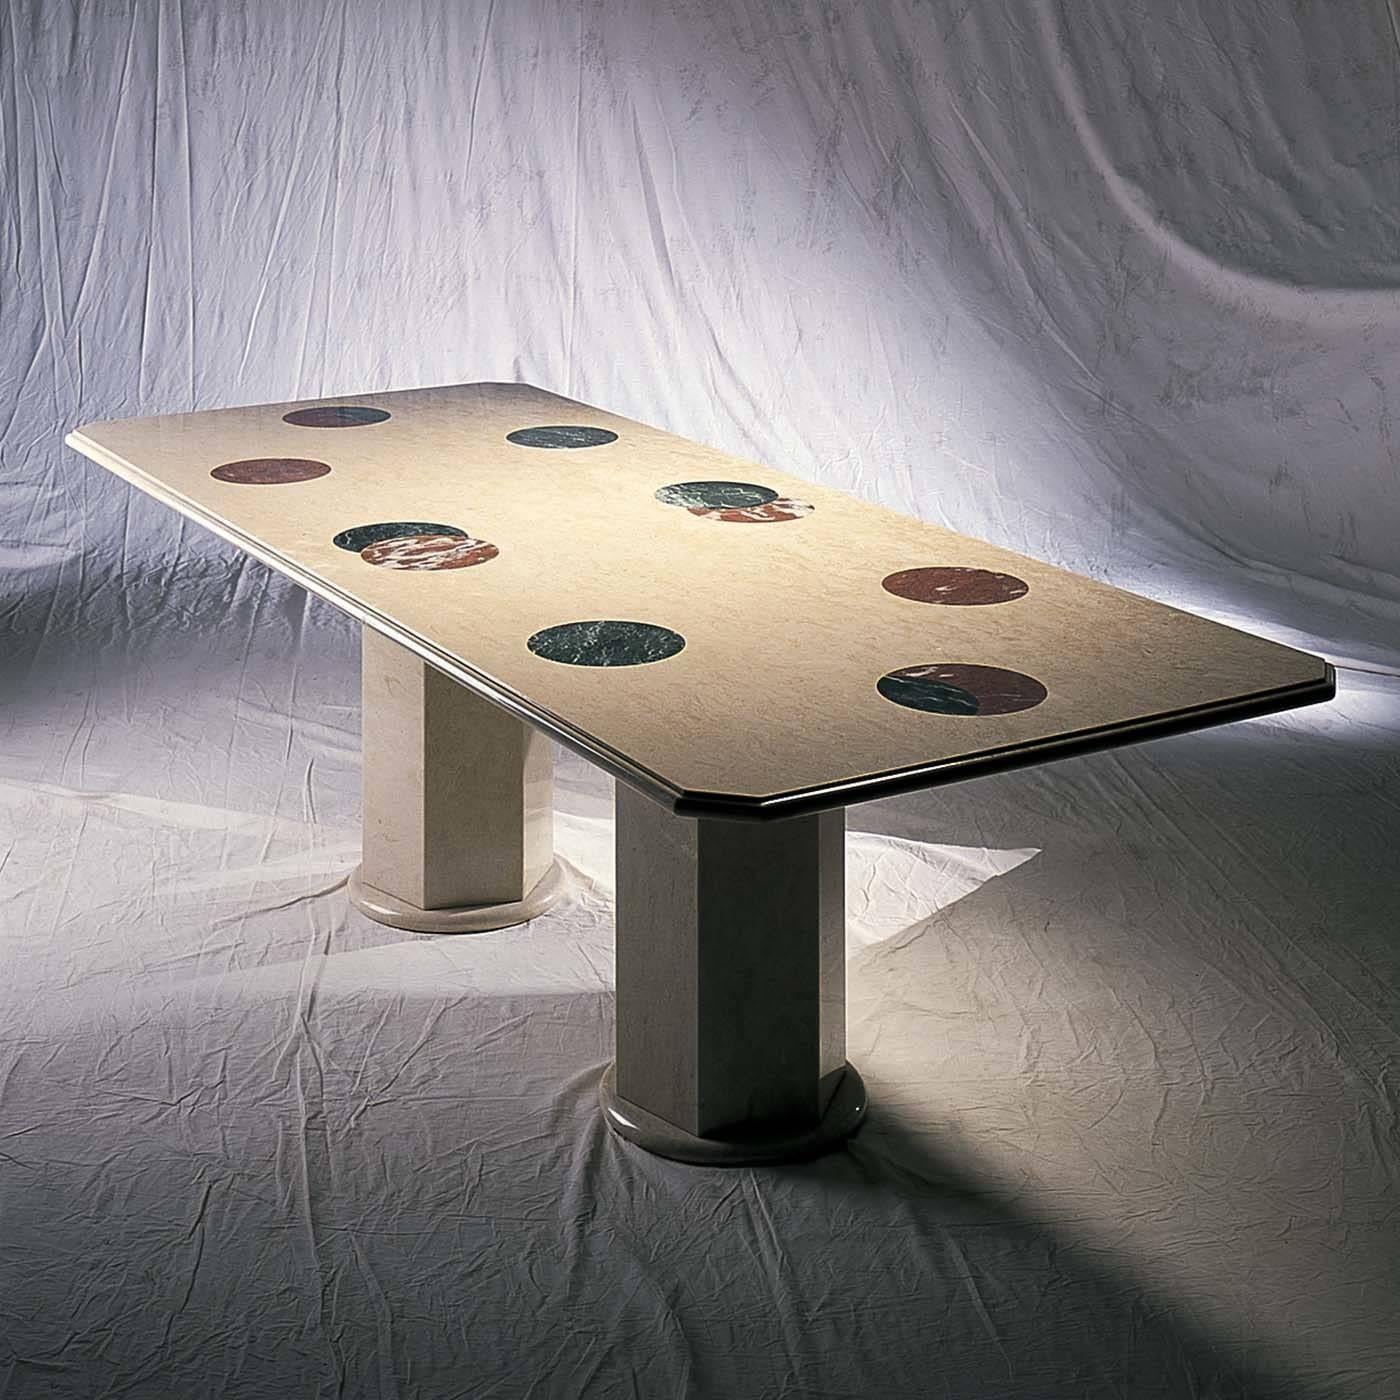 Pleasant lines, elegant materials, and vibrant colors make this table a captivating piece capable of standing out in any decor. The top, made of a solid piece of Perlato di Sicilia, has a rectangular shape with tapering corners, and features six